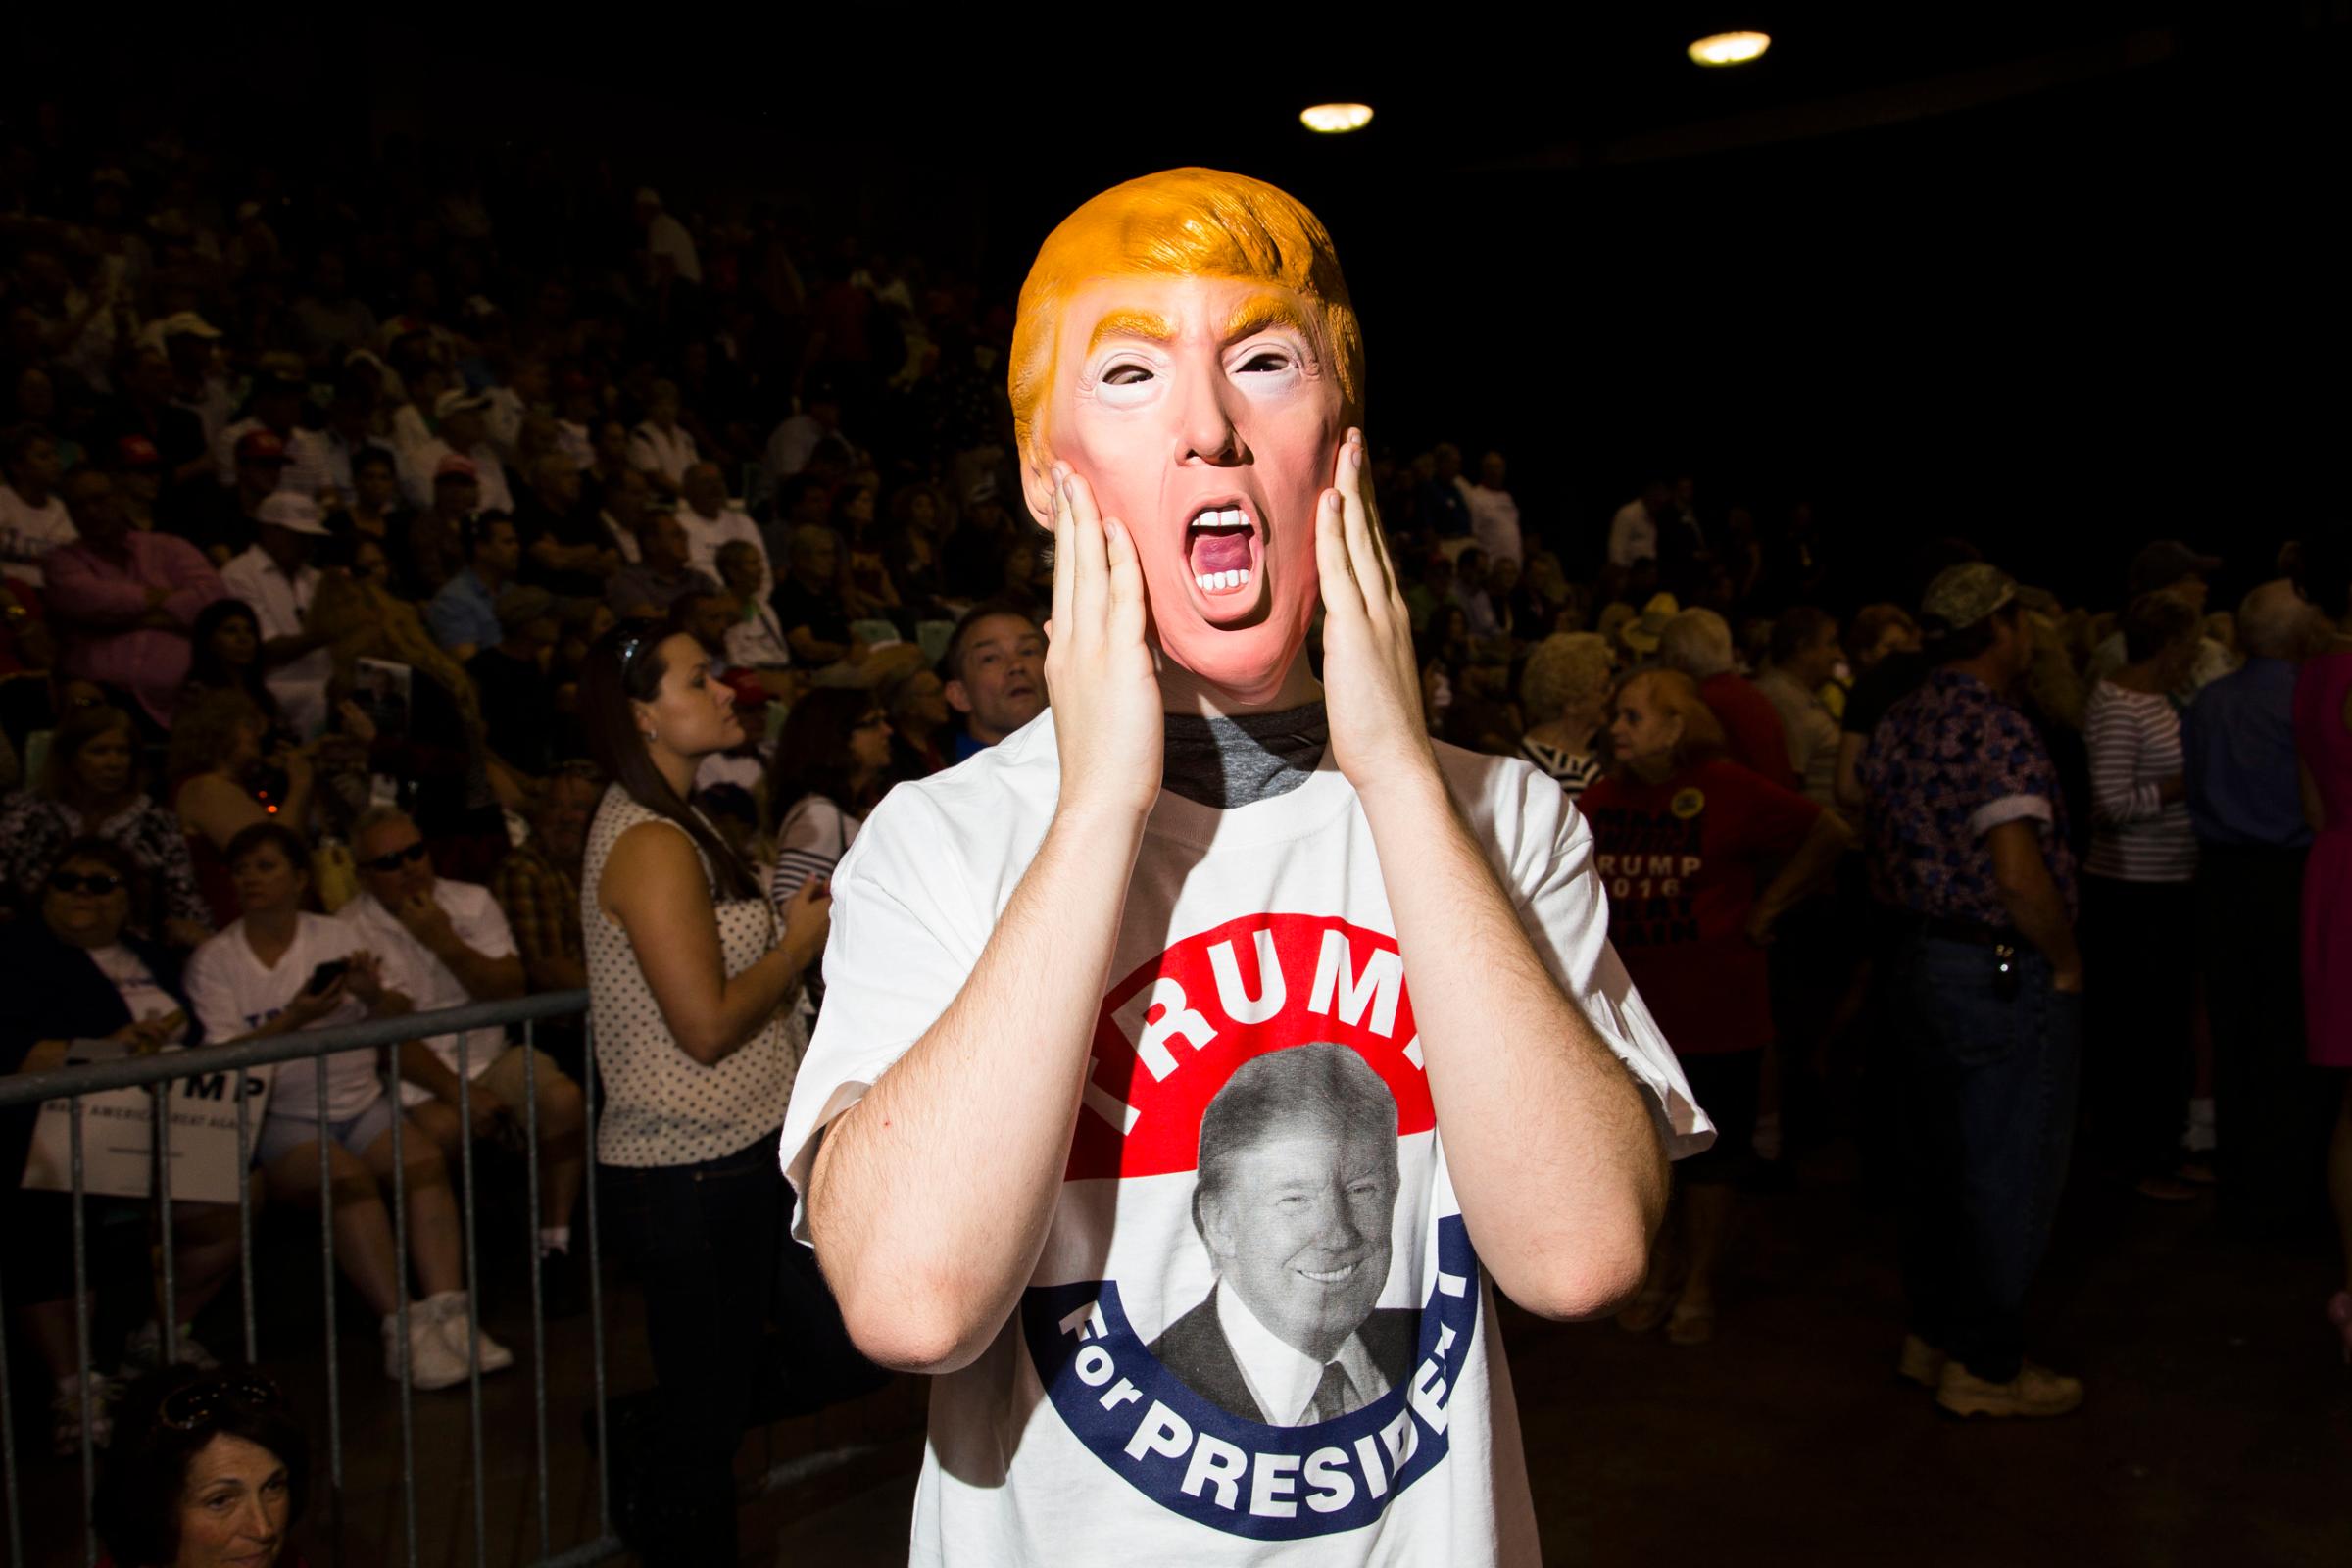 Donald Trump supporter at a campaign rally held in the Robarts Arena, Sarasota, Fla. Nov. 28, 2015.